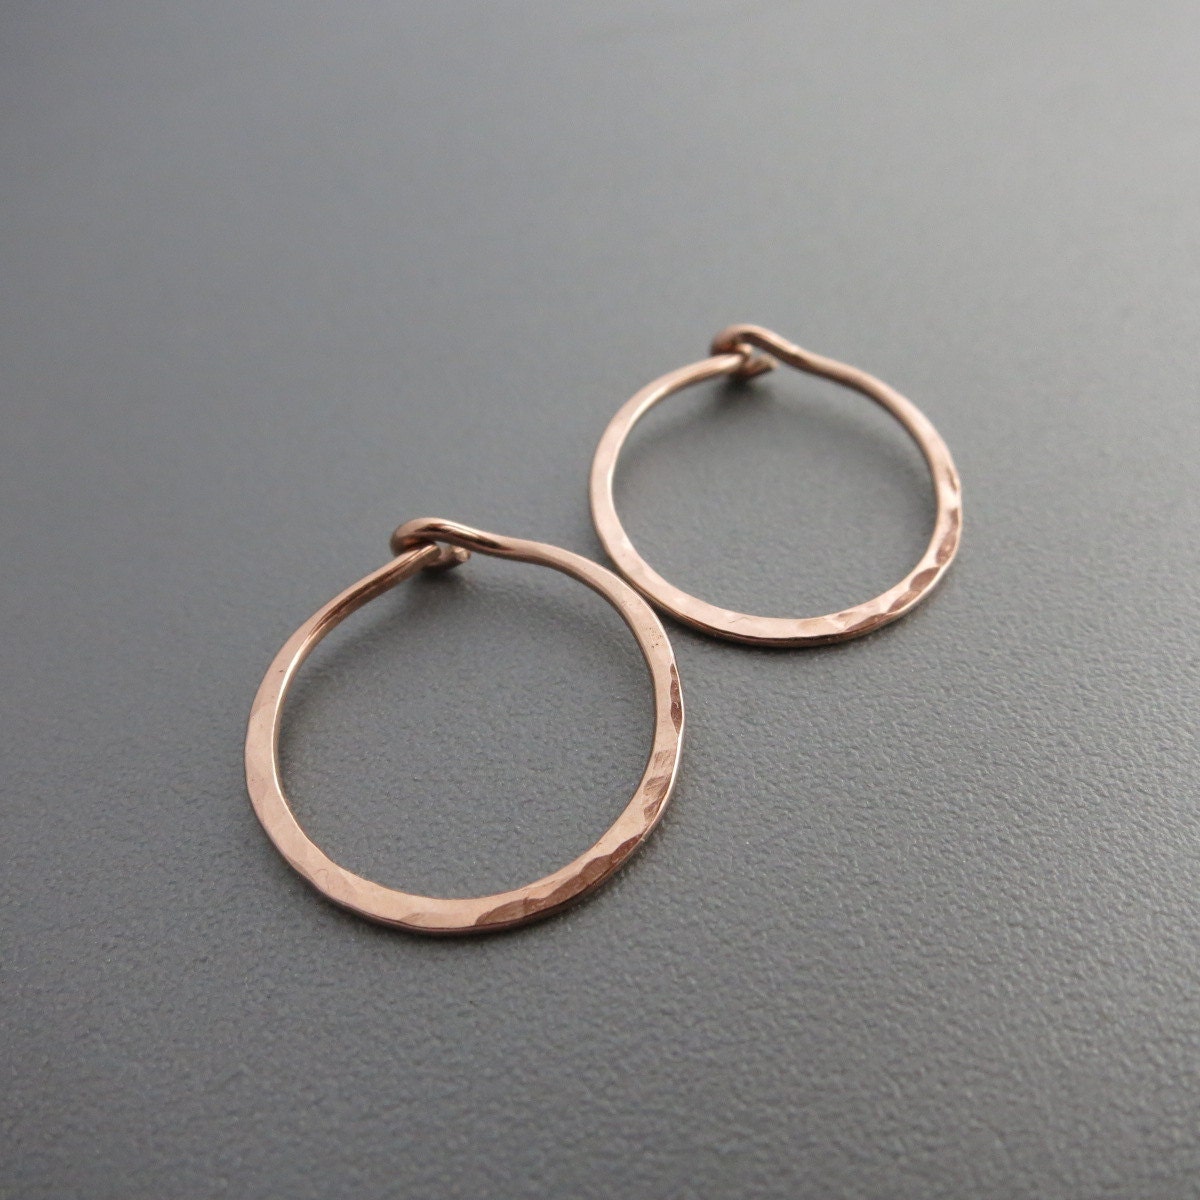 Small Rose Gold Hammered Hoop Earrings 5/8D | Etsy